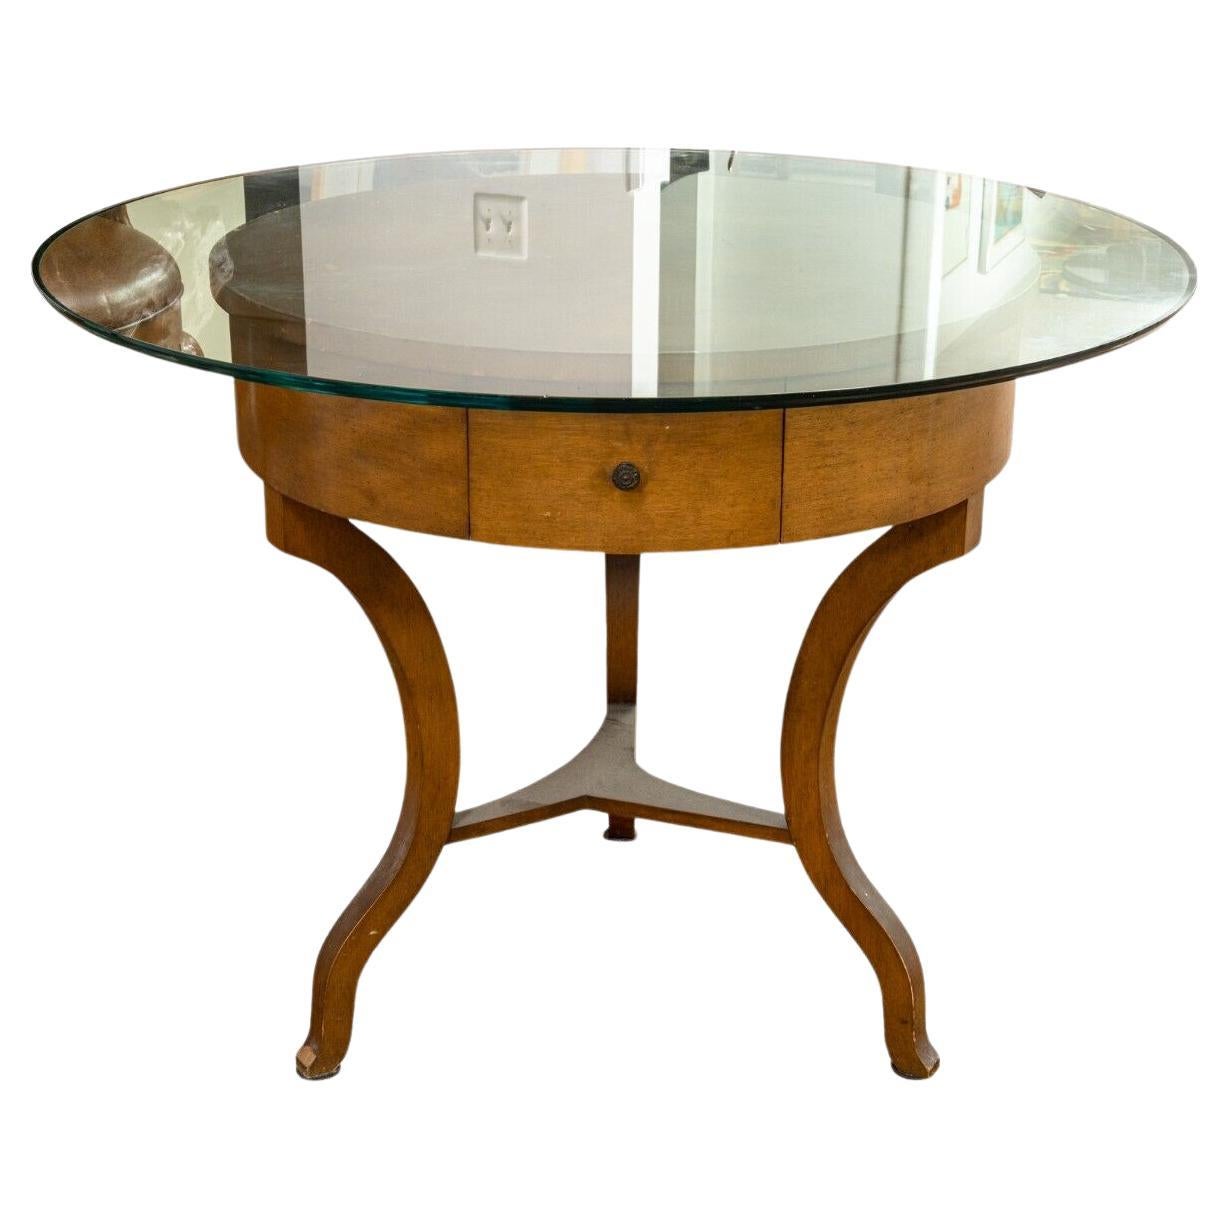 Vintage Cassard Chateau Original Wood and Glass Round Dintette Table For Sale